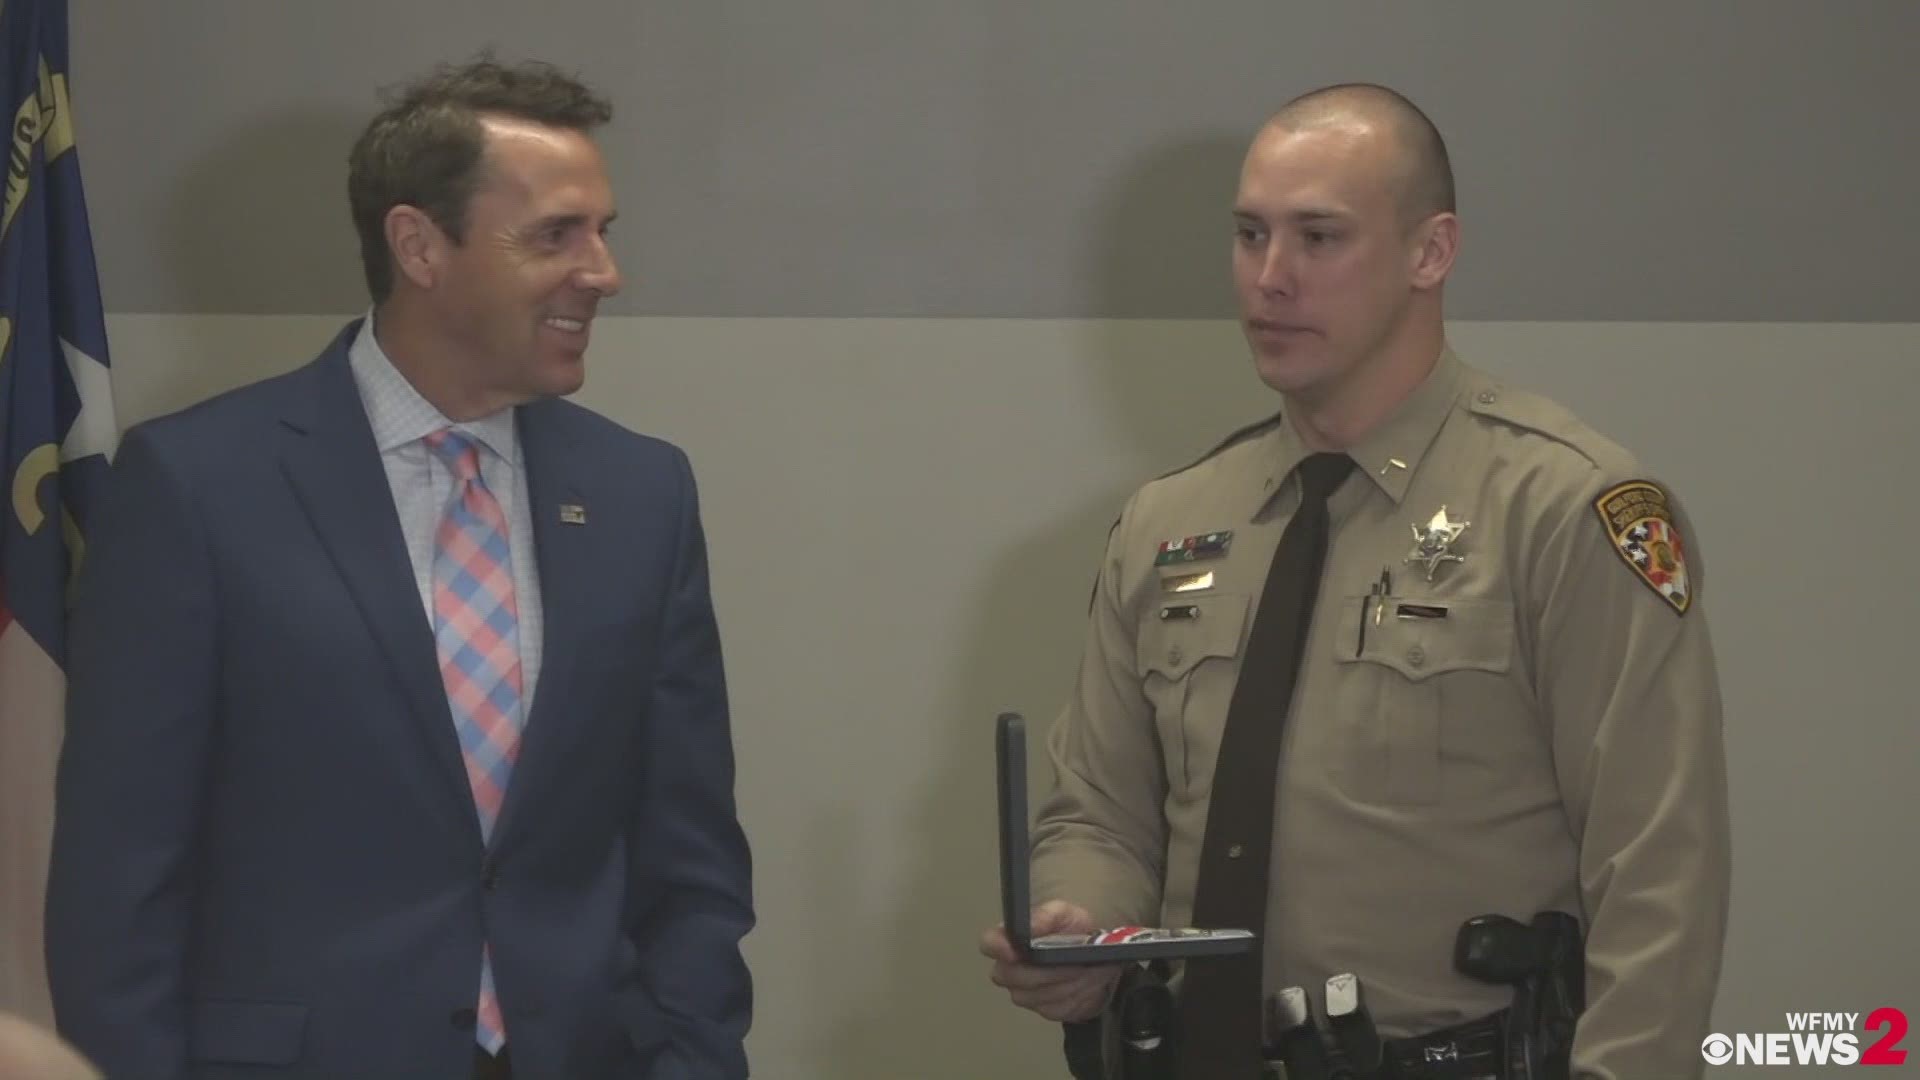 U.S. Rep. Mark Walker presents Guilford County Deputy Matthew Self with the Congressional Badge of Bravery at a service on Monday. Self was shot while on a domestic violence call in 2017.